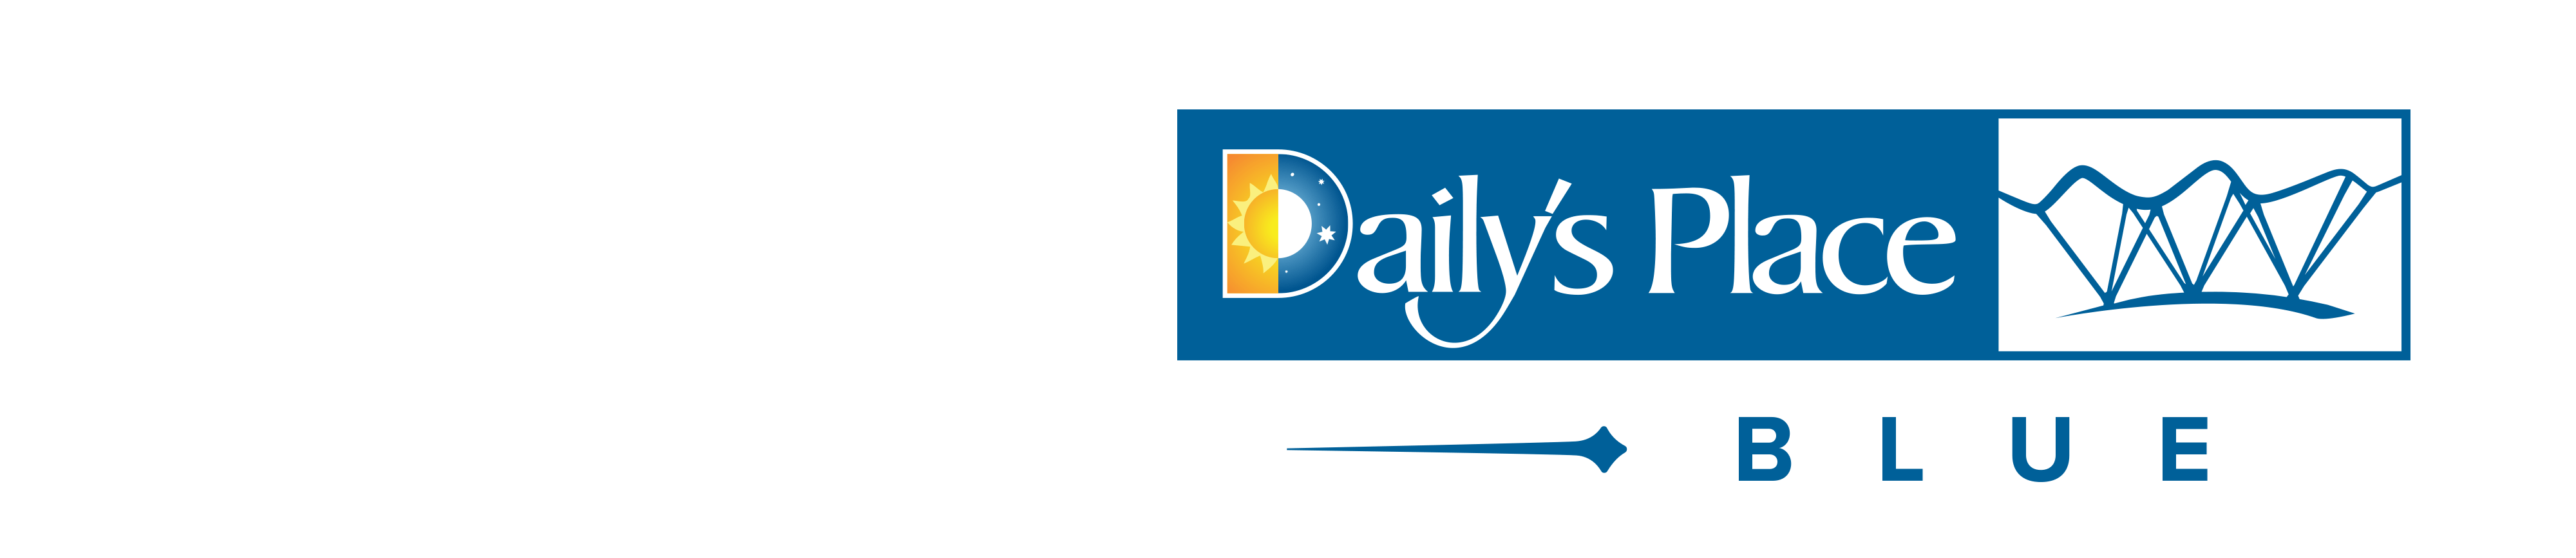 Daily's Logo - Daily's Place Blue | Daily's Place